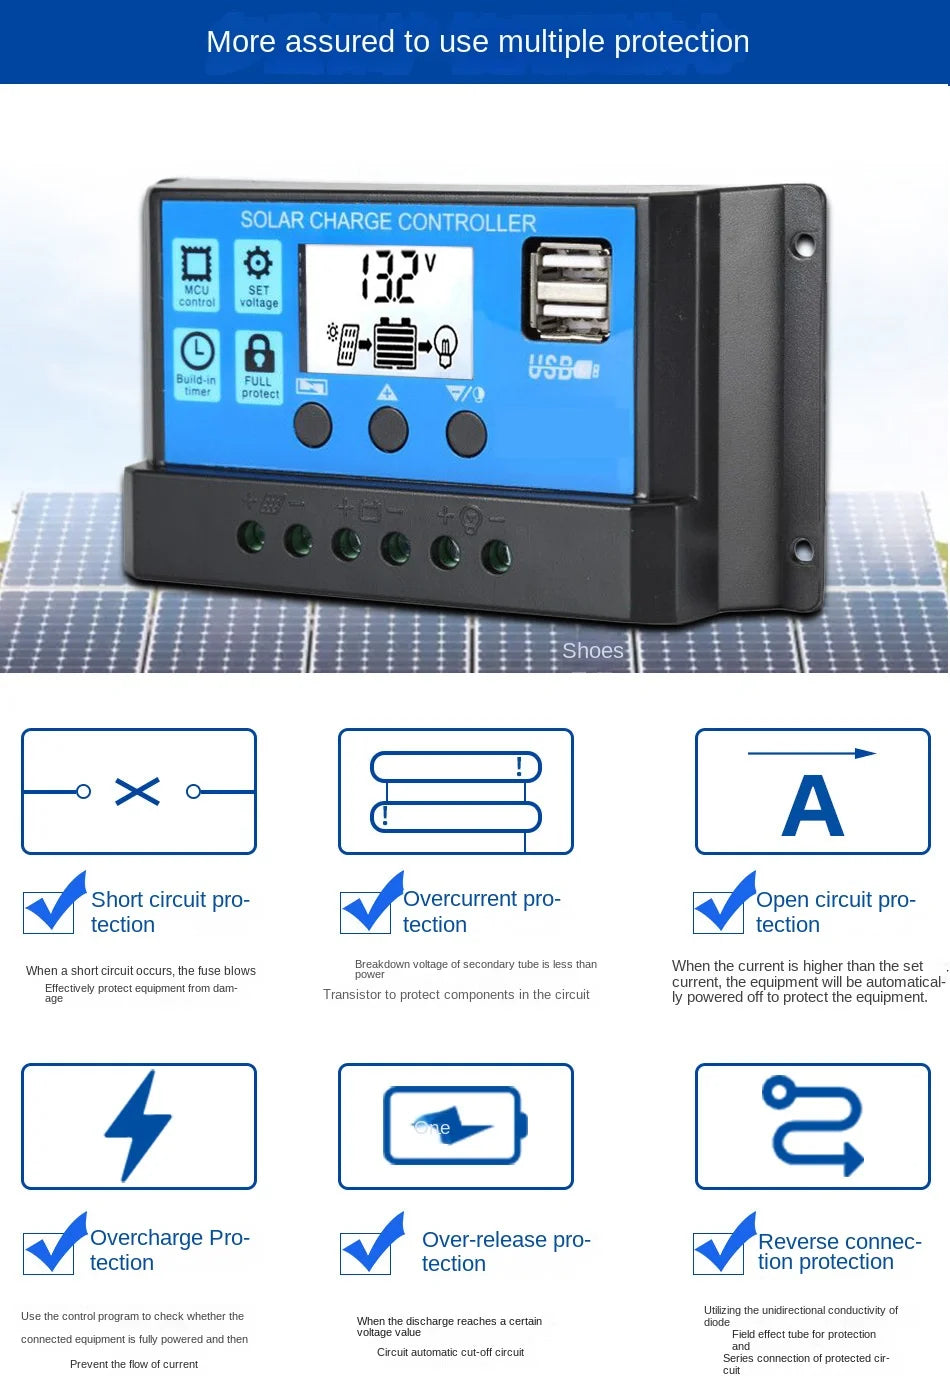 Solar charge controller with multiple protections: short-circuit, overcurrent, open-circuit, and more.